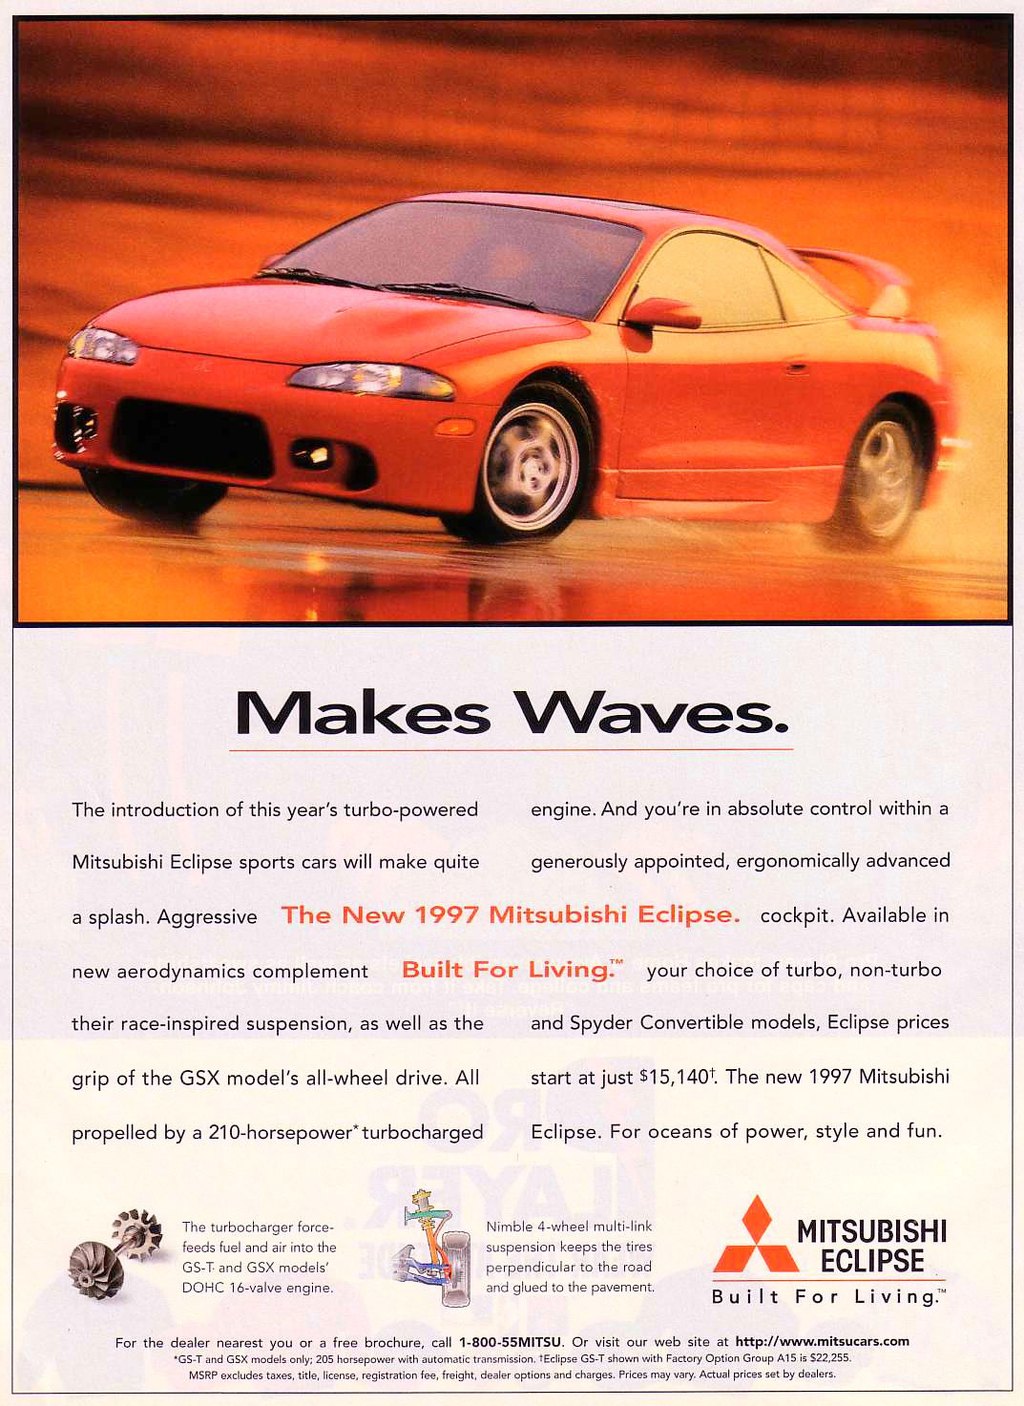 
Makes Waves. 
The introduction of this year's turbo-powered engine. And you're in absolute control within a Mitsubishi Eclipse sports cars will make quite generously appointed, ergonomically advanced a splash. Aggressive The New 1997 Mitsubishi Eclipse. cockpit. Available in new aerodynamics complement Built For Living:'' your choice of turbo, non-turbo their race-inspired suspension, as well as the and Spyder Convertible models, Eclipse prices grip of the GSX model's all-wheel drive. All start at just $15,1401. The new 1997 Mitsubishi propelled by a 210-horsepower''turbocharged Eclipse. For oceans of power, style and fun. 

The turbocharger force-feeds fuel and air into the GS-T. and GSX models' DOHC 16-valve engine. 

Nimble 4-wheel multi-link suspension keeps the tires perpendicular to the road and glued to the pavement. 
MITSUBISHI M ECLIPSE  Built For Living.'' 
For the dealer nearest you or a free brochure, call 1-800-55MITSU. Or visit our web site at http://www.mitsucars.com 'GS-T and GSX models only; 205 horsepower with automatic transmission. tEclipse GS-T shown with Factory Option Group Al 5 is 522,255. MSRP excludes taxes, title, license, registration fee, freight, dealer options and charges. Prices may vary. Actual prices set by dealers. 
